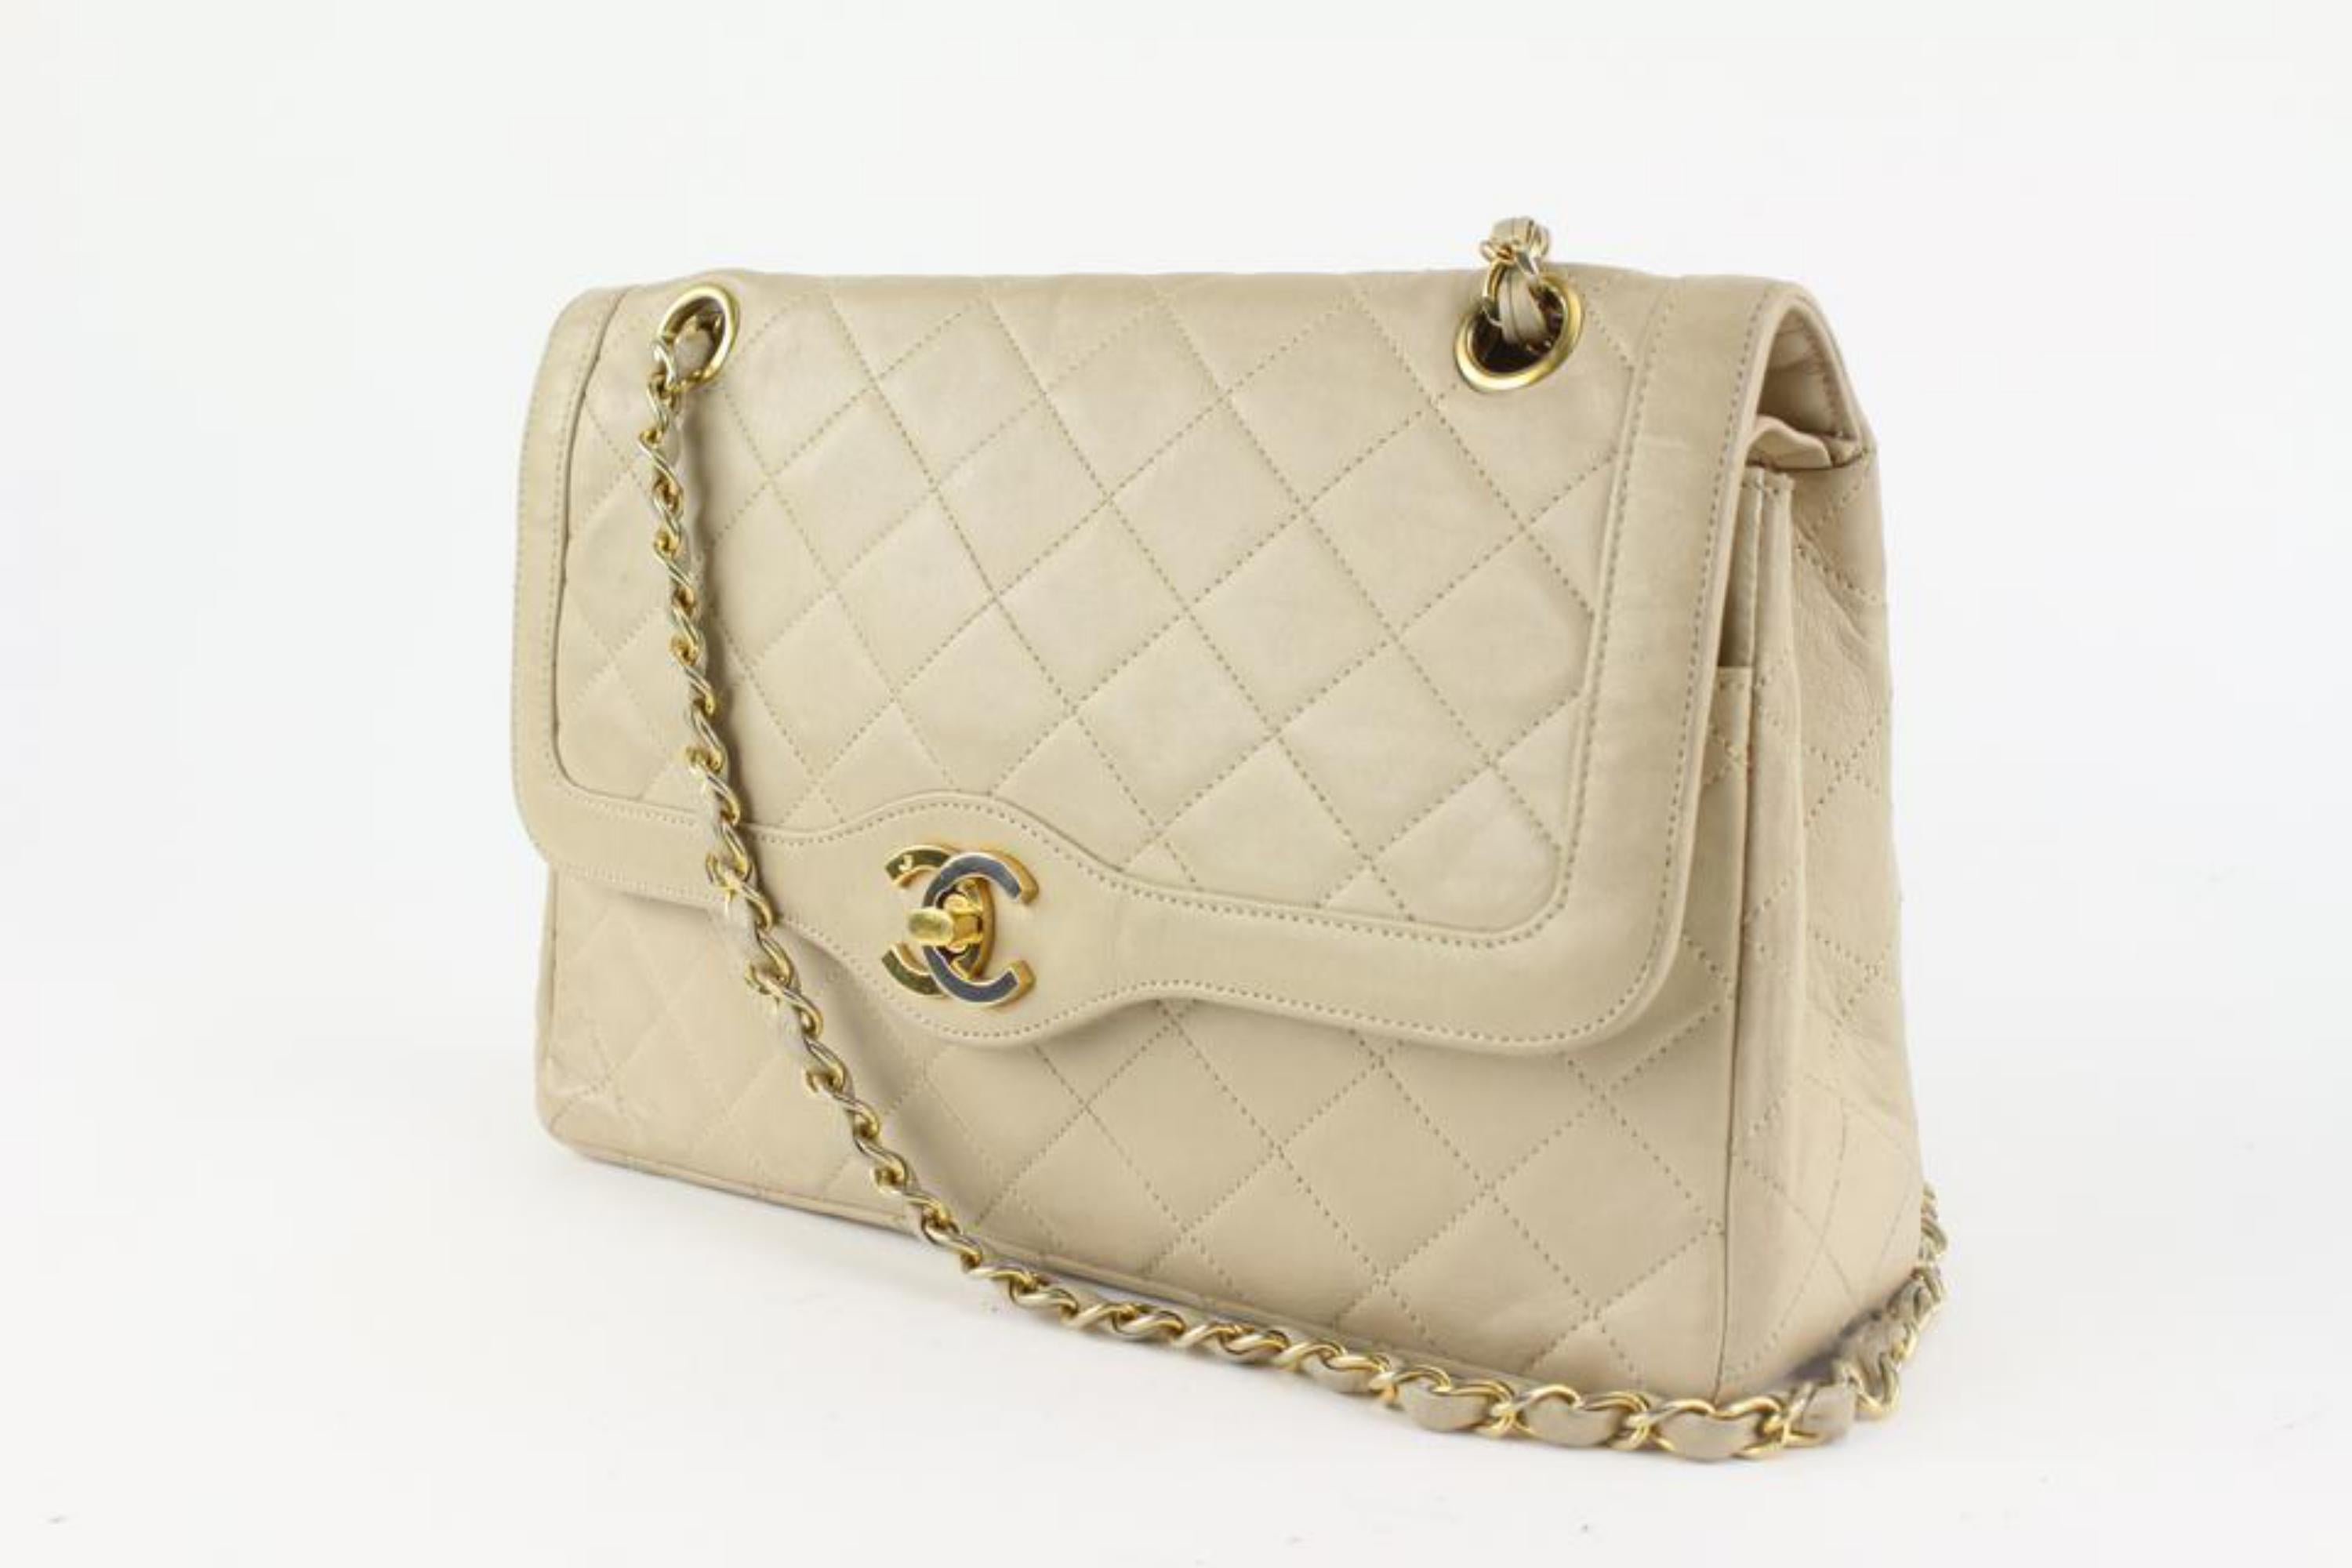 Chanel Limited Two-Tone Paris Edition Beige Classic Flap 1220c43
Made In: France
Measurements: Length:  10